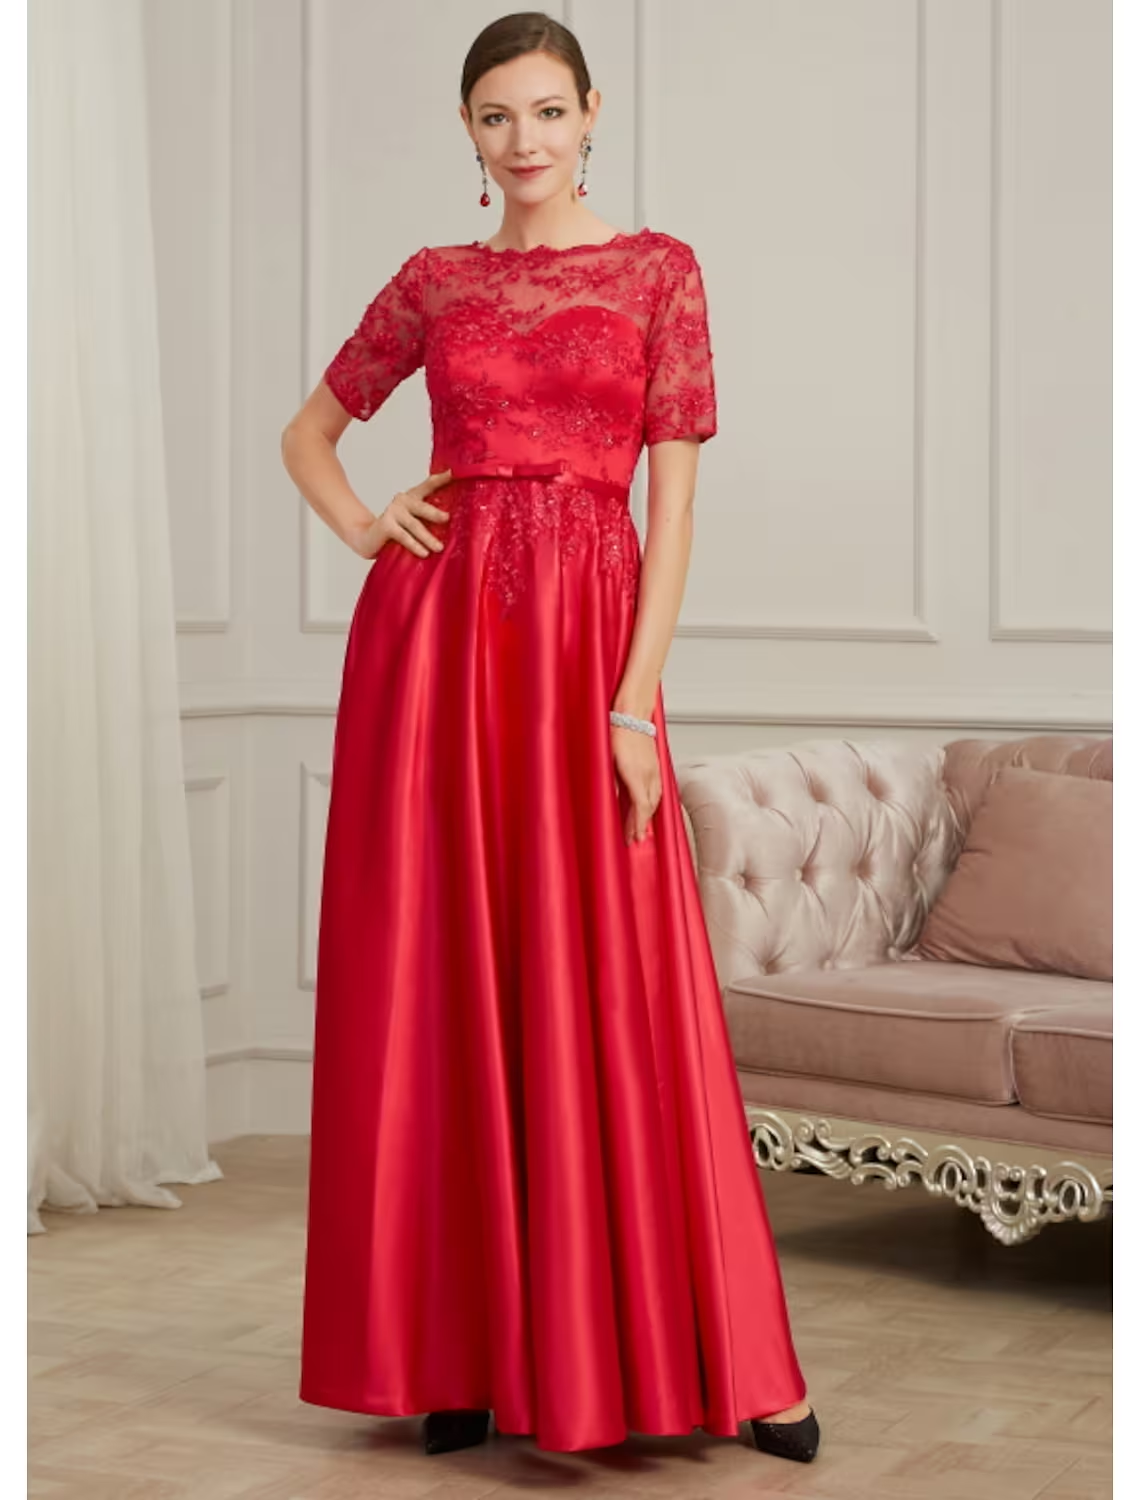 A-Line Evening Gown Elegant Dress Wedding Guest Floor Length Short Sleeve Jewel Neck Polyester with Pleats Beading Appliques